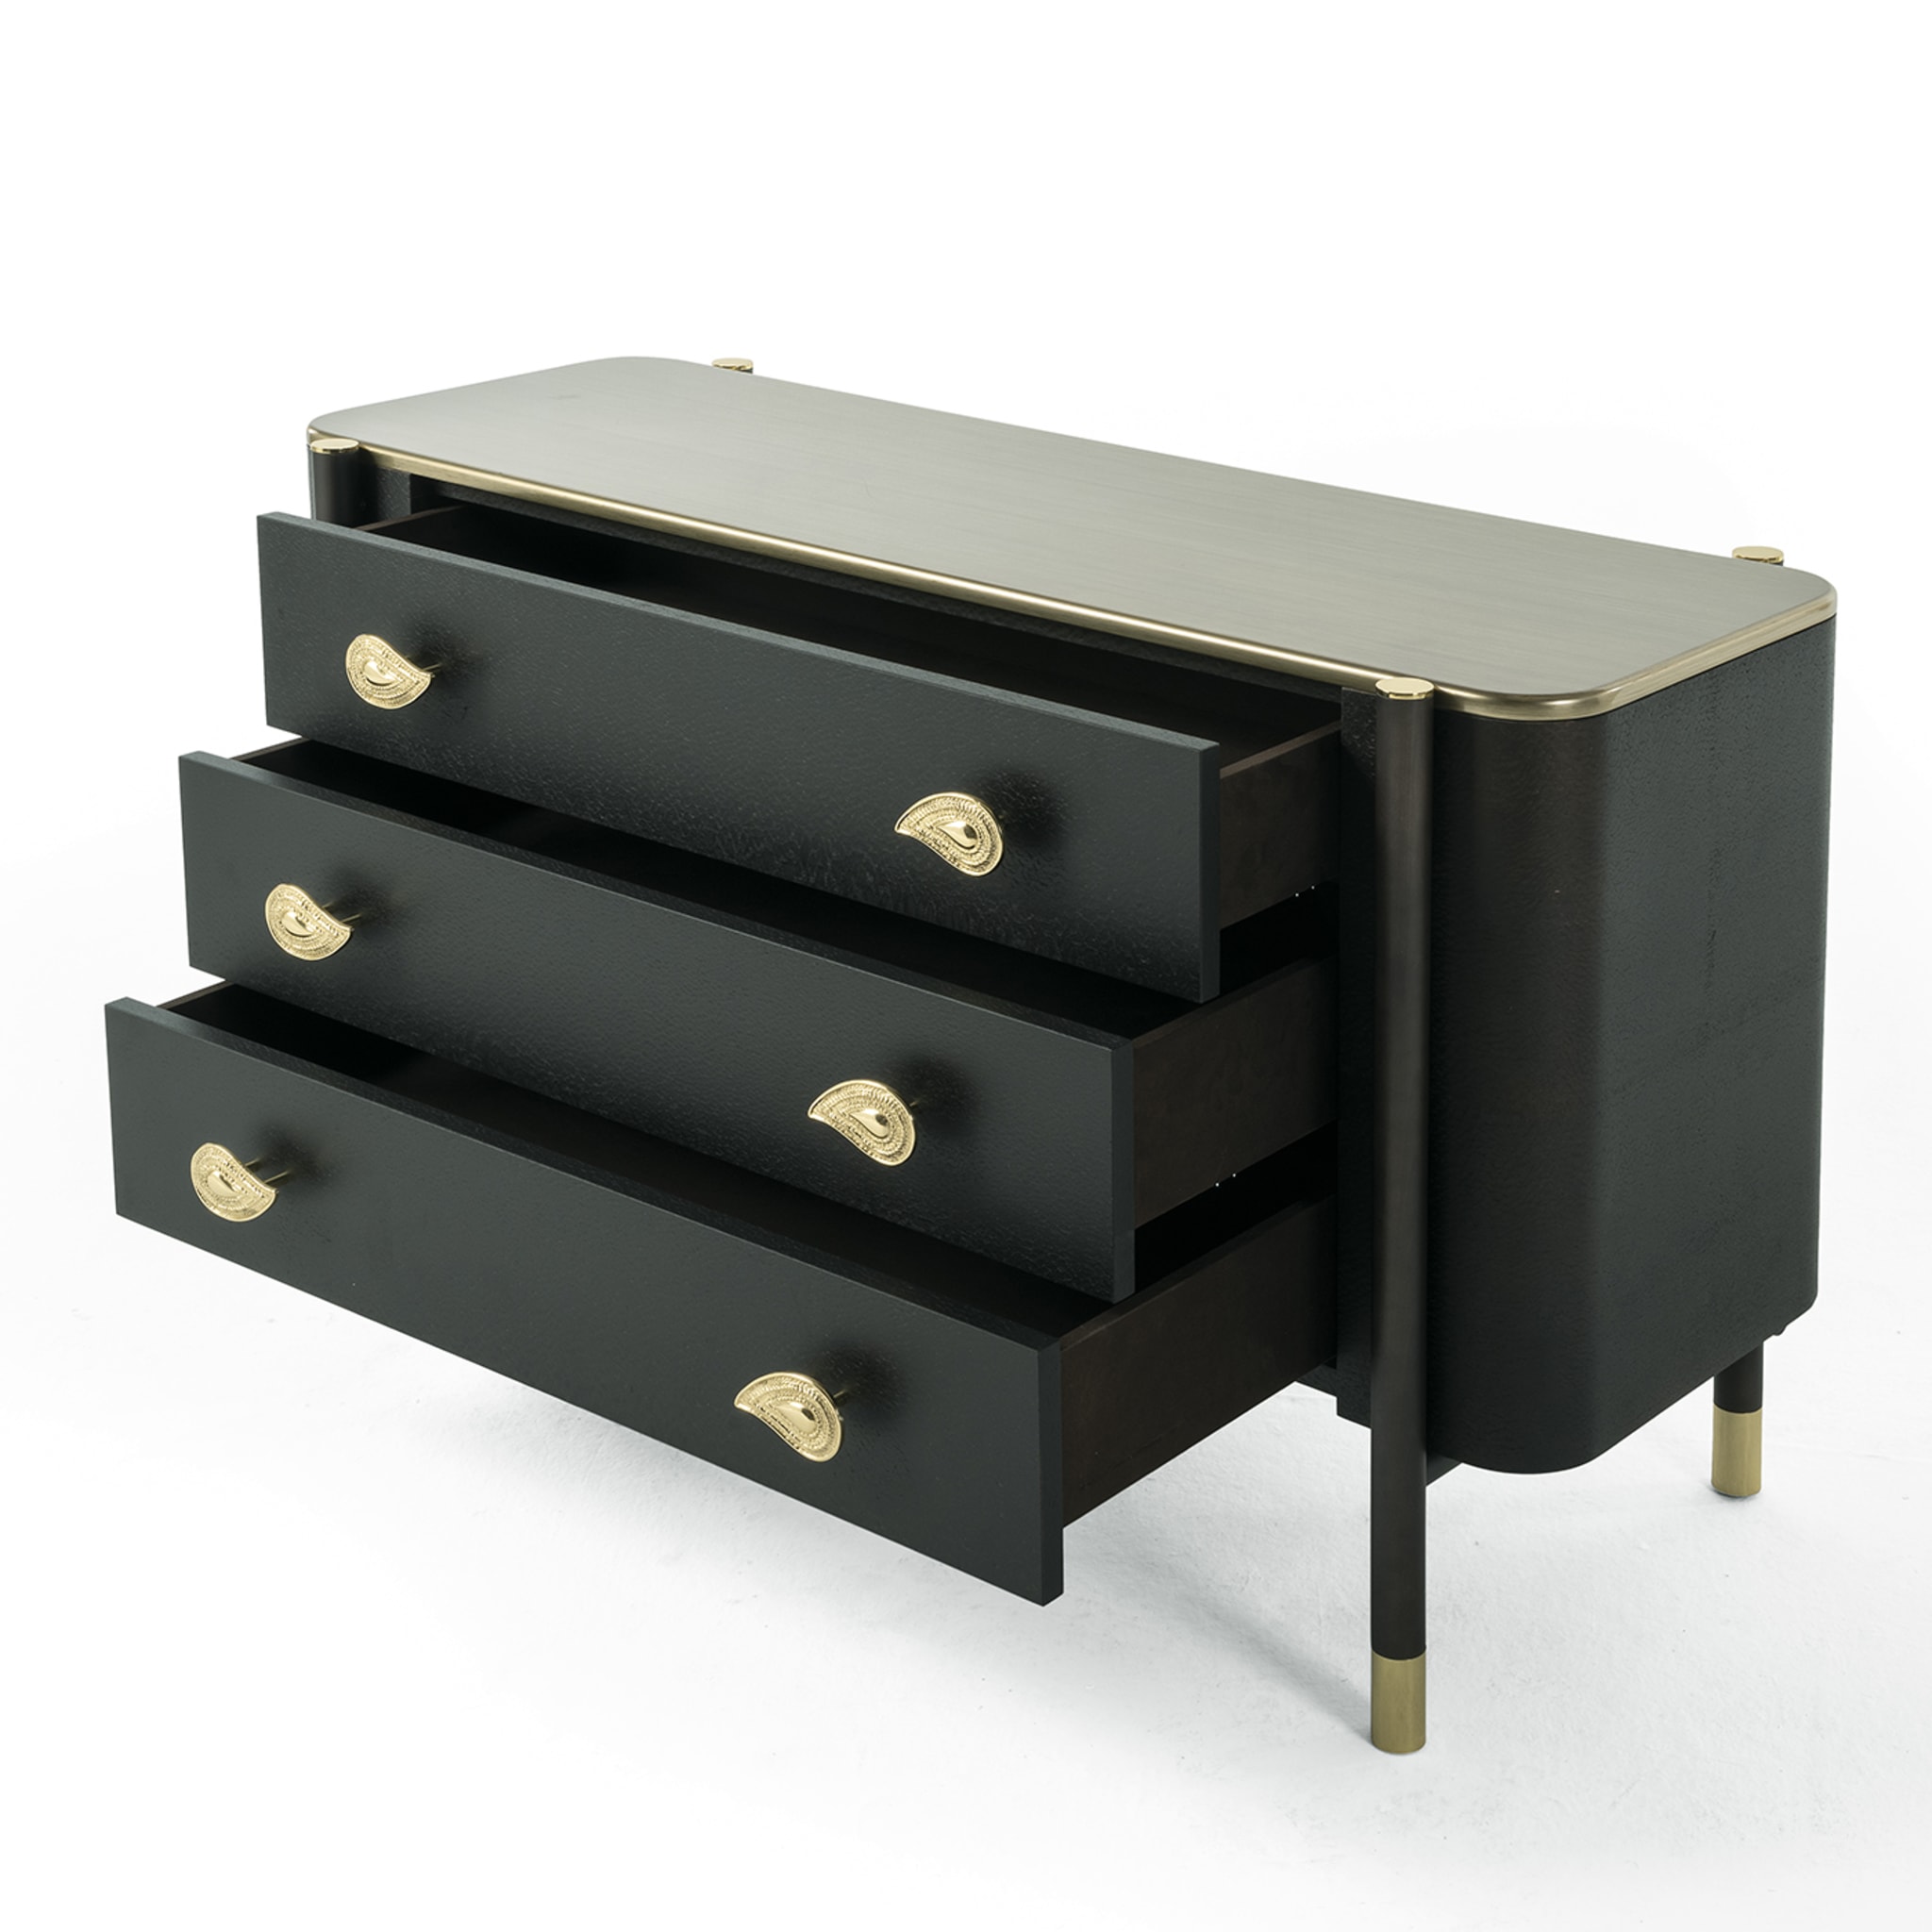 Woodstock Chest of Drawers - Alternative view 2